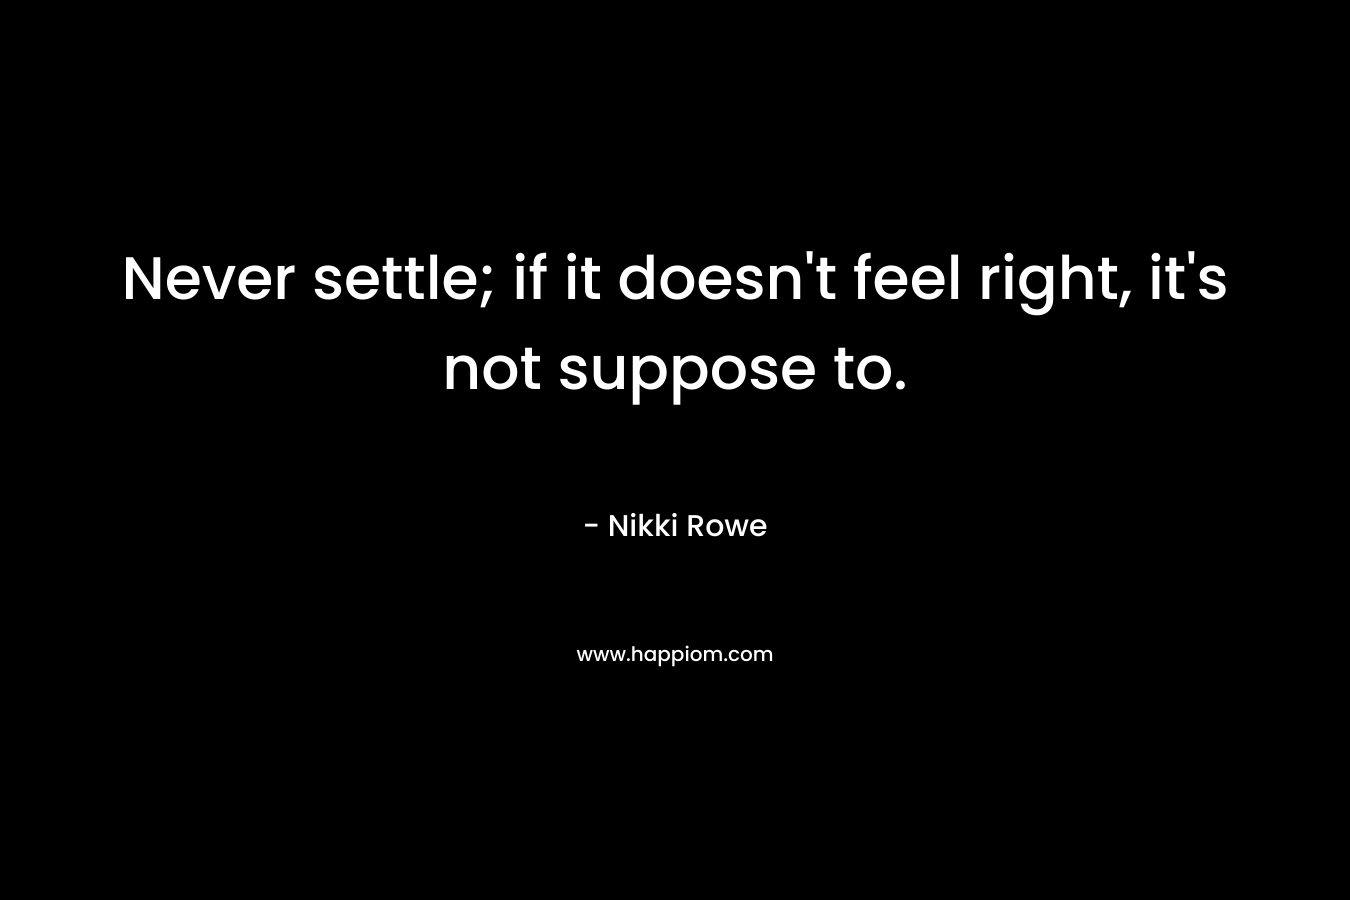 Never settle; if it doesn't feel right, it's not suppose to.